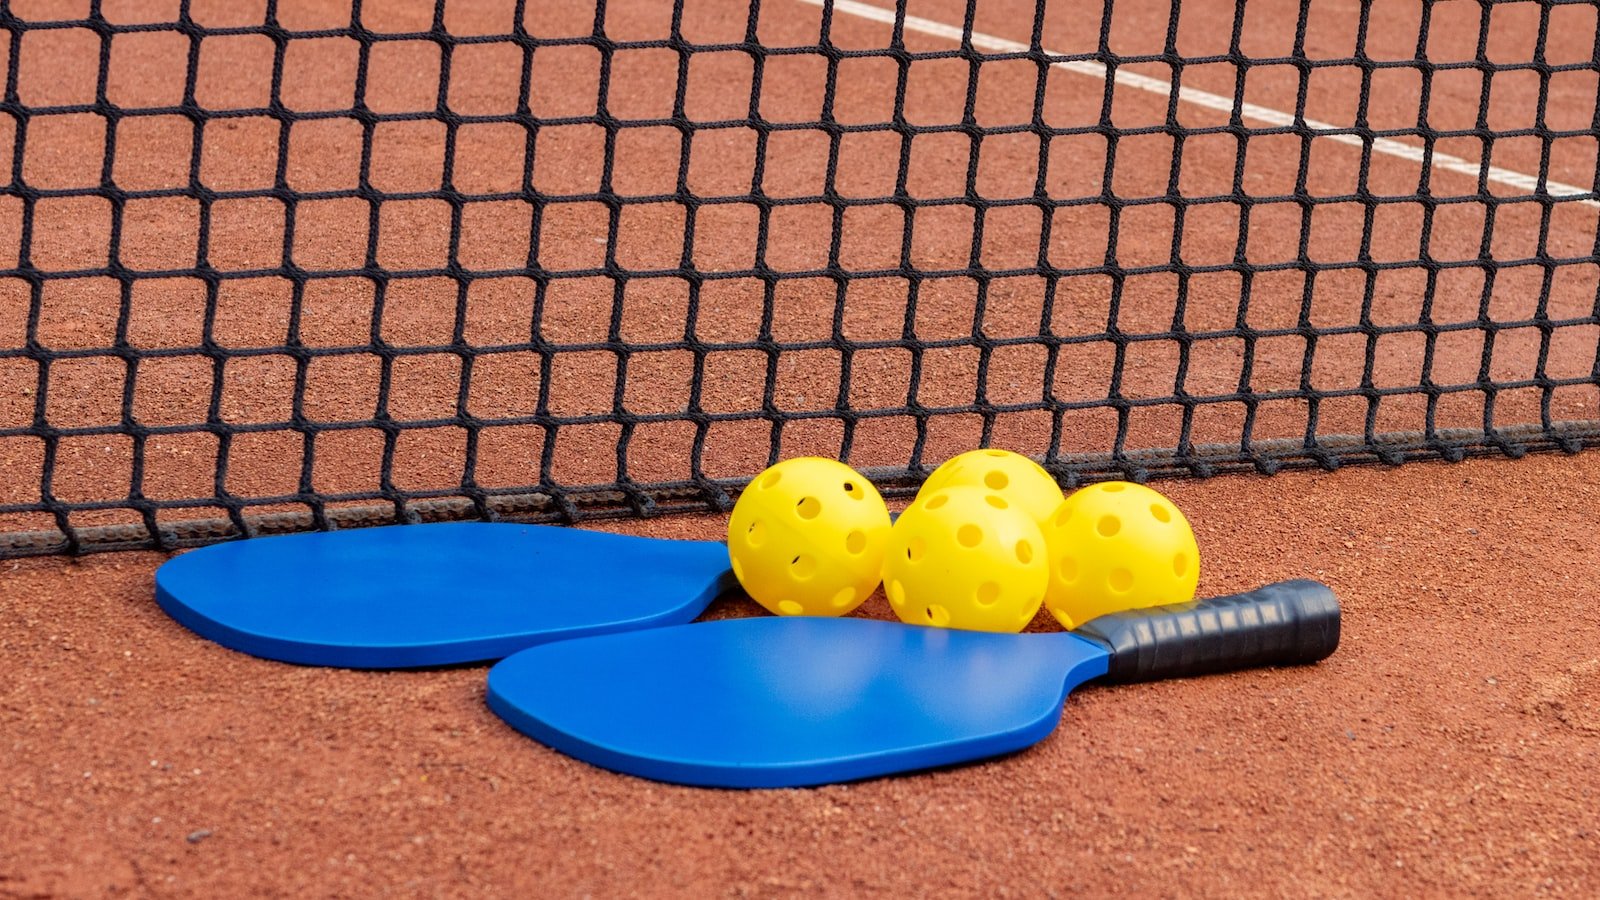 The Unwritten Rules of Pickleball: A Guide to Court Etiquette